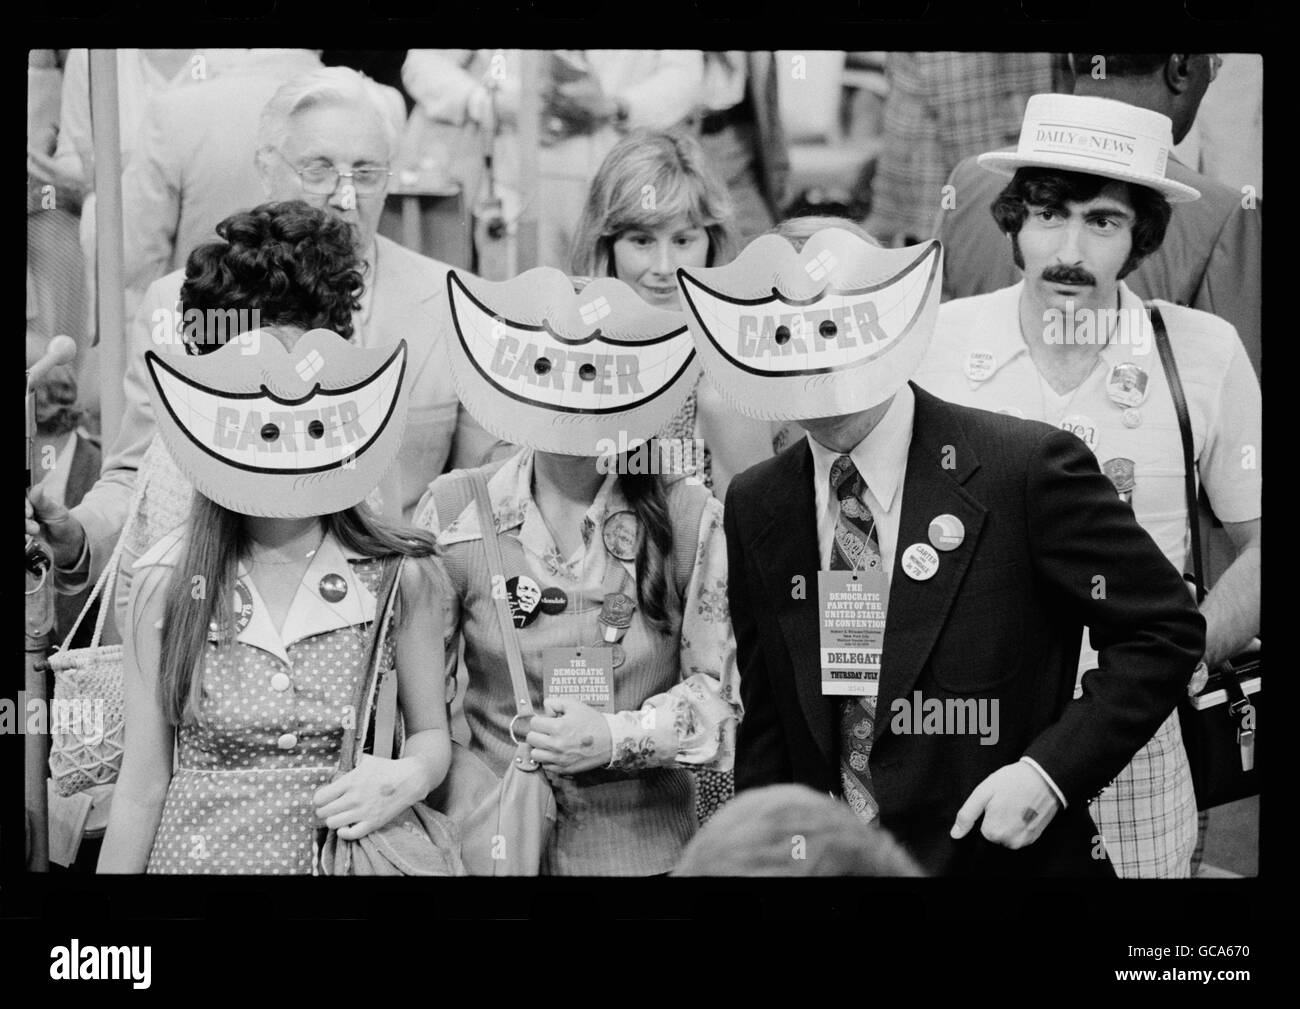 Smile masks worn by delegates at the 1976 Presidential Nominating Convention. The mask was a reference to Jimmy Carter's famous bright smile. Stock Photo